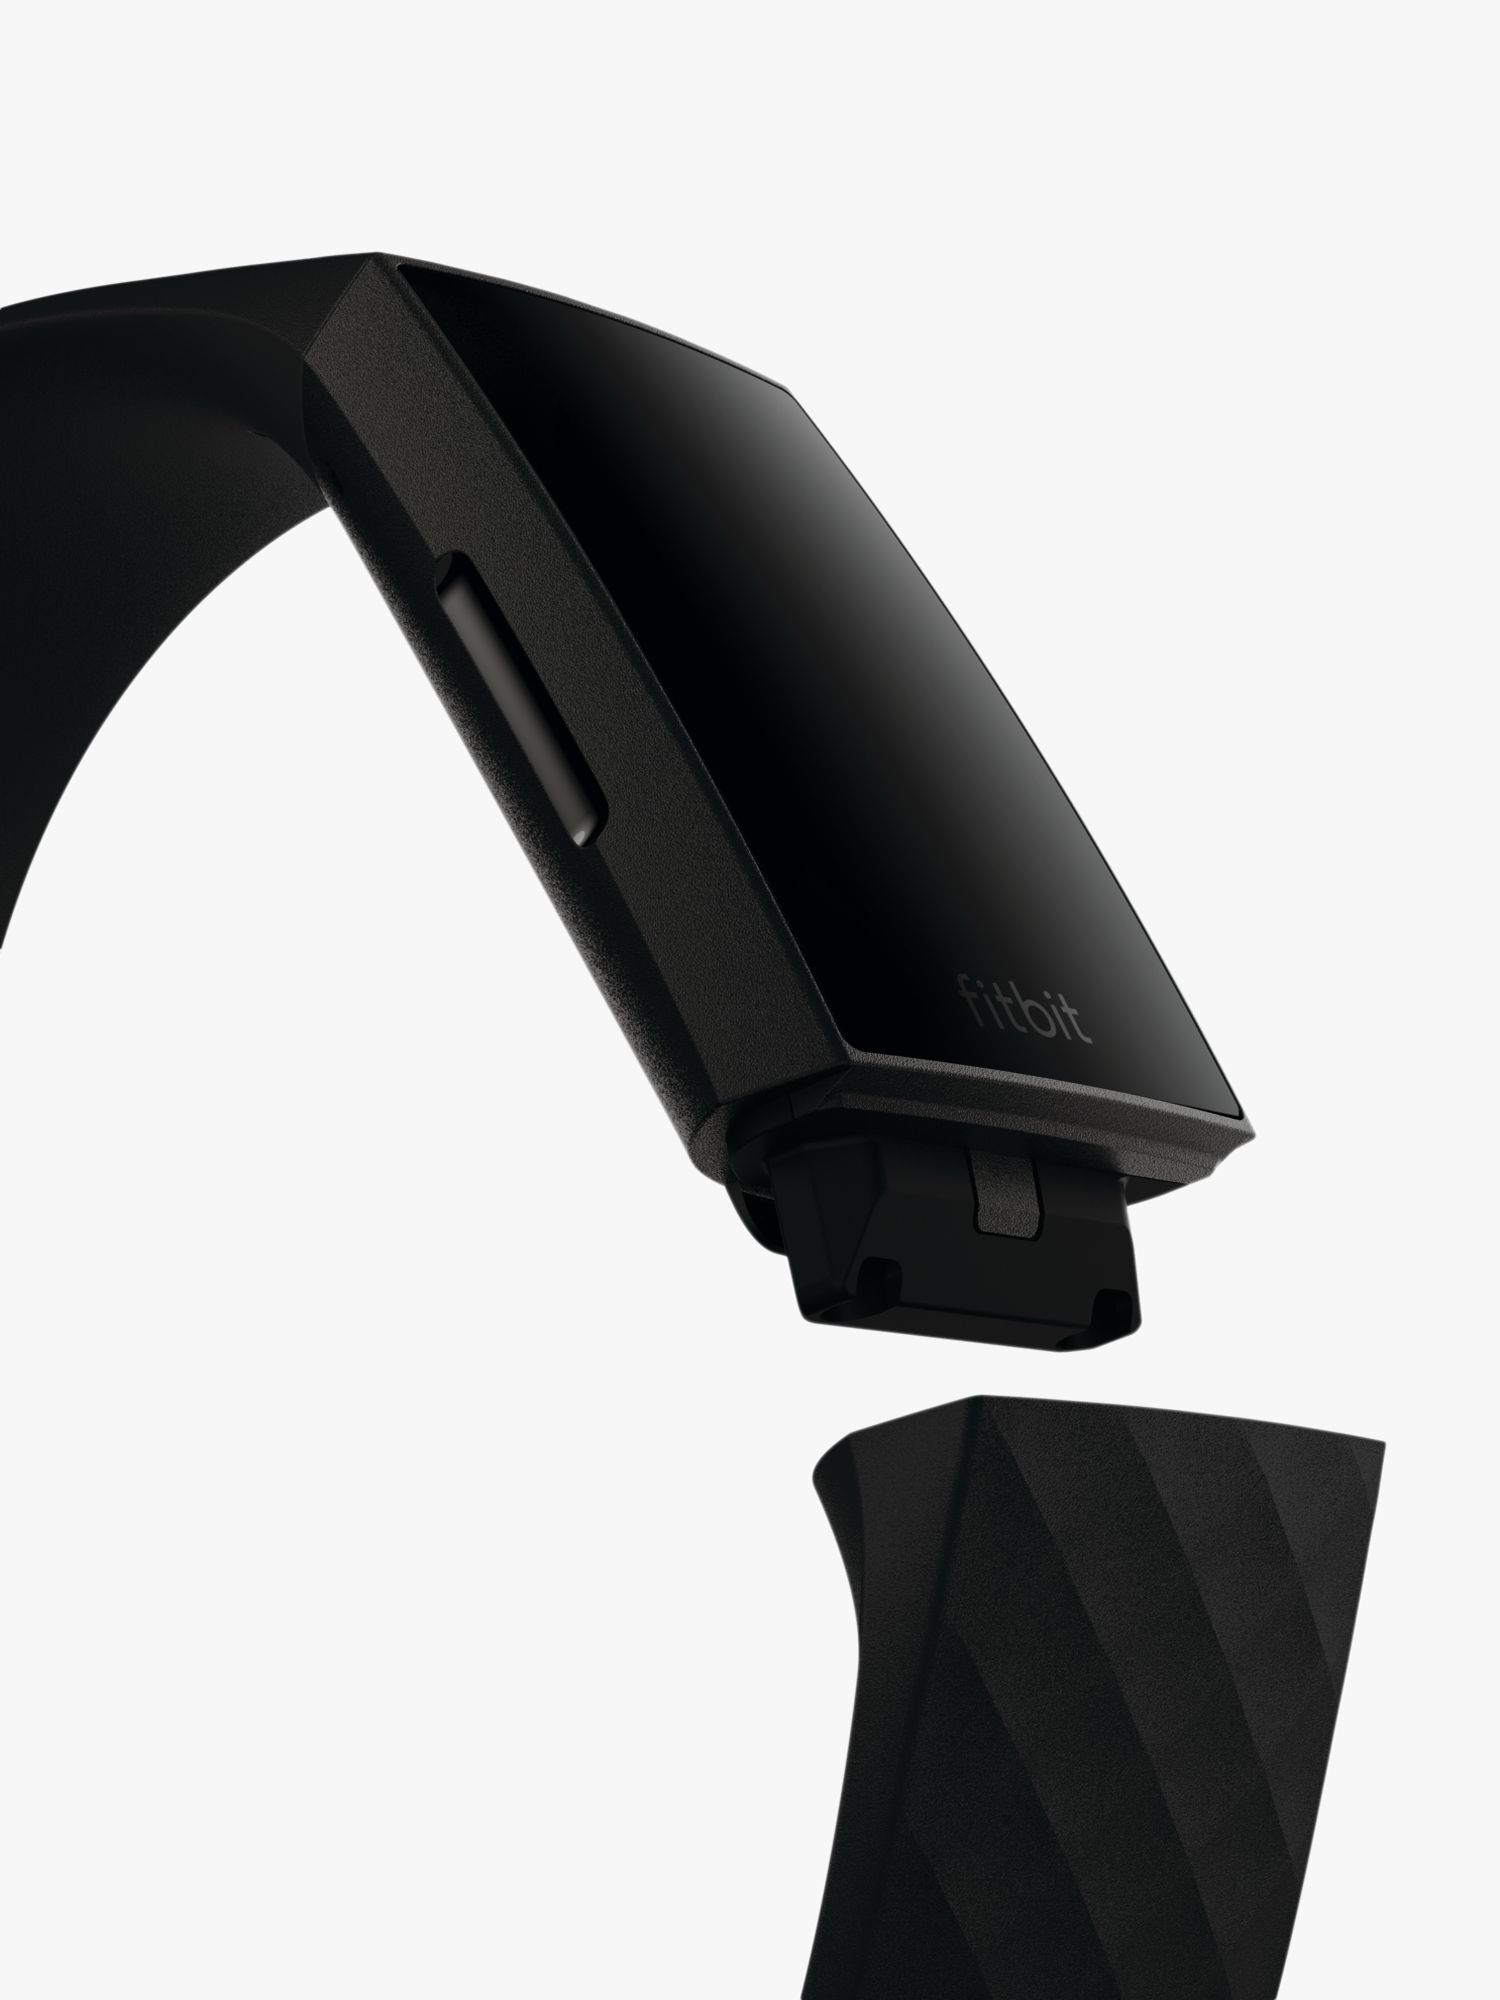 fitbit charge john lewis